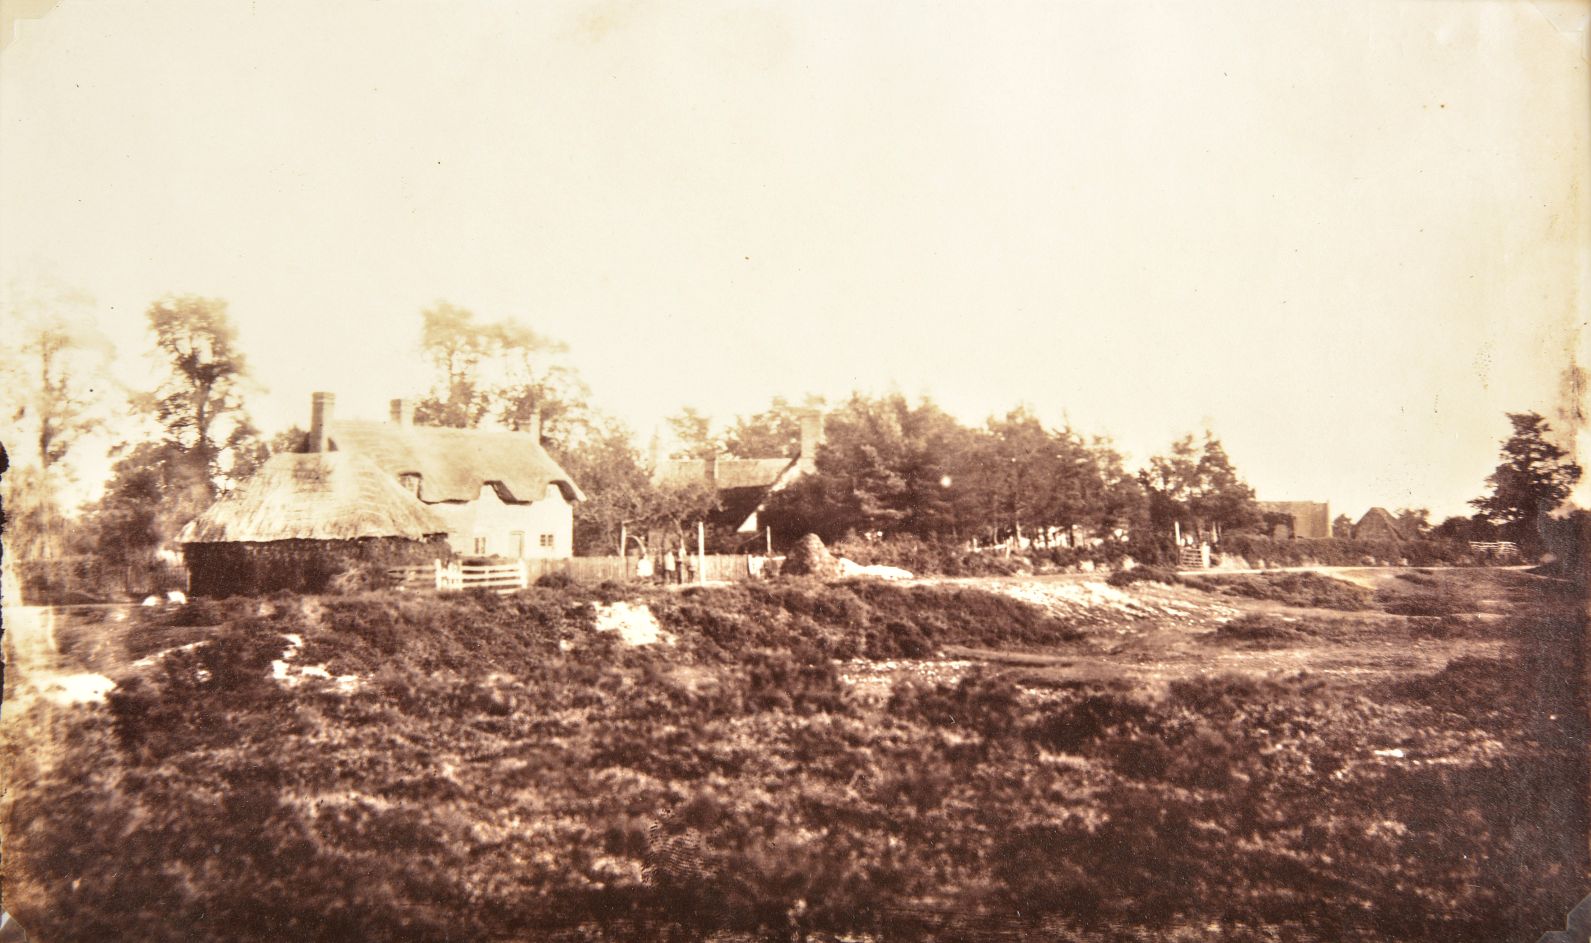 *Early Photography. A group of 9 early photographs, 1850s and 1860s, including images by James